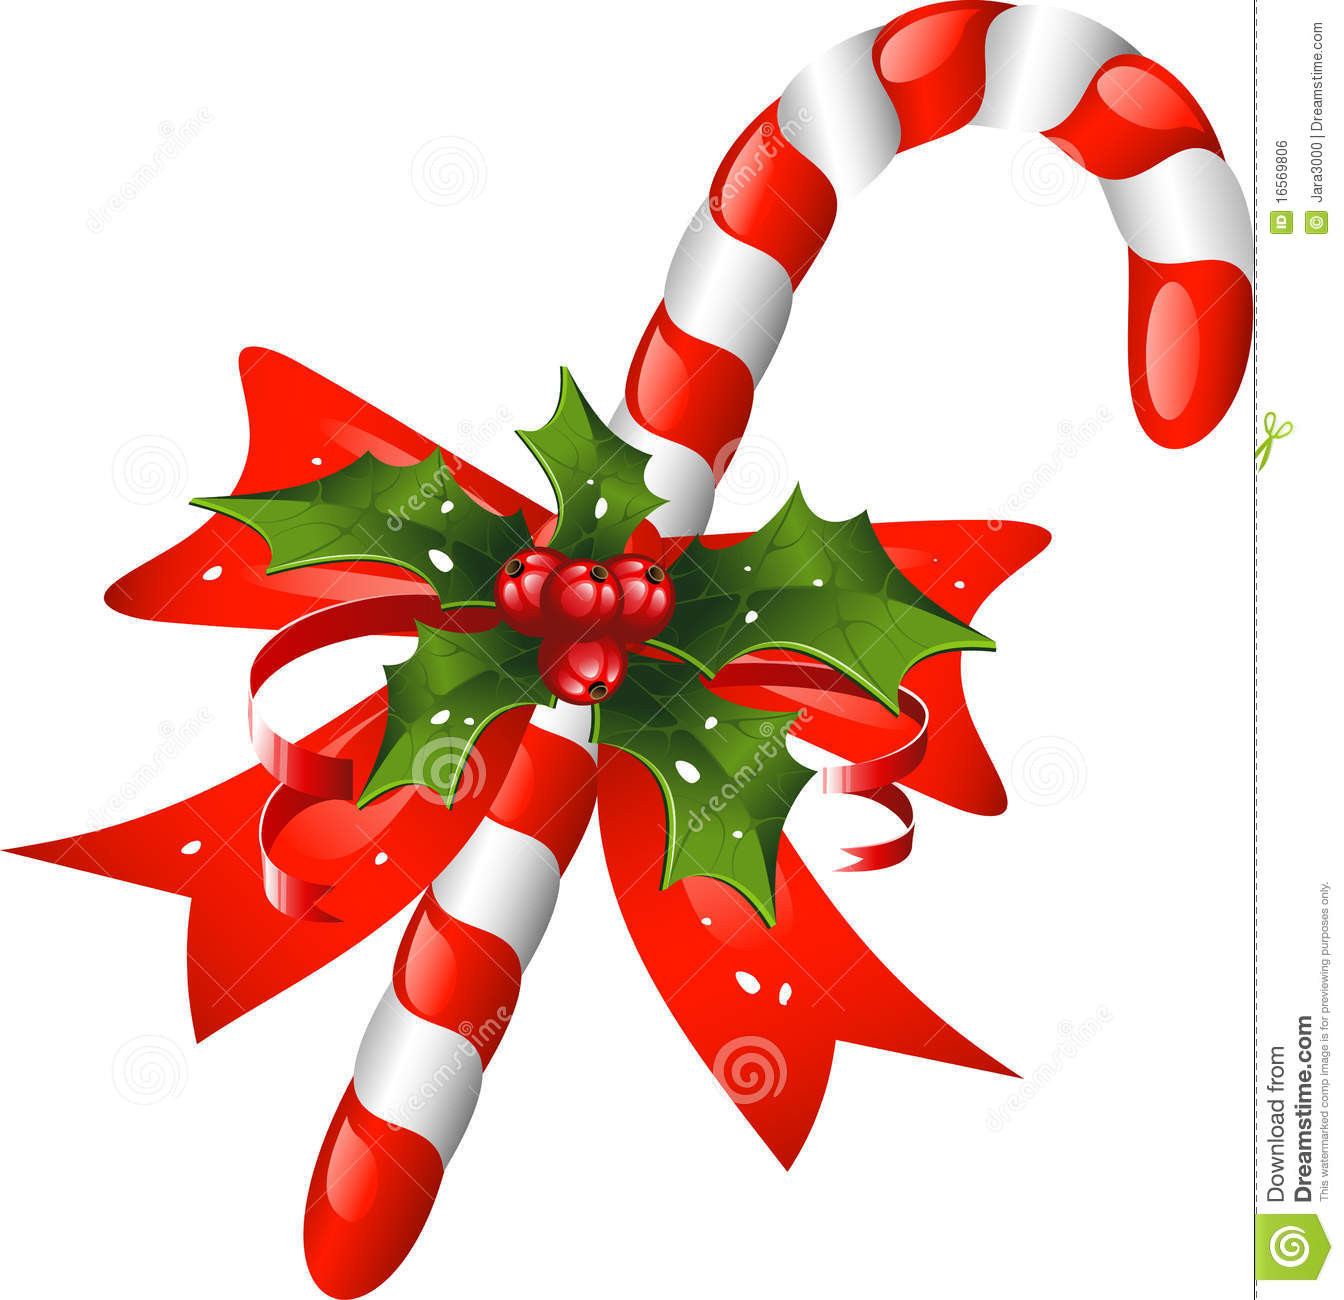 Christmas Candy Images
 Christmas Candy Cane Decorated With A Bow And Holl Stock